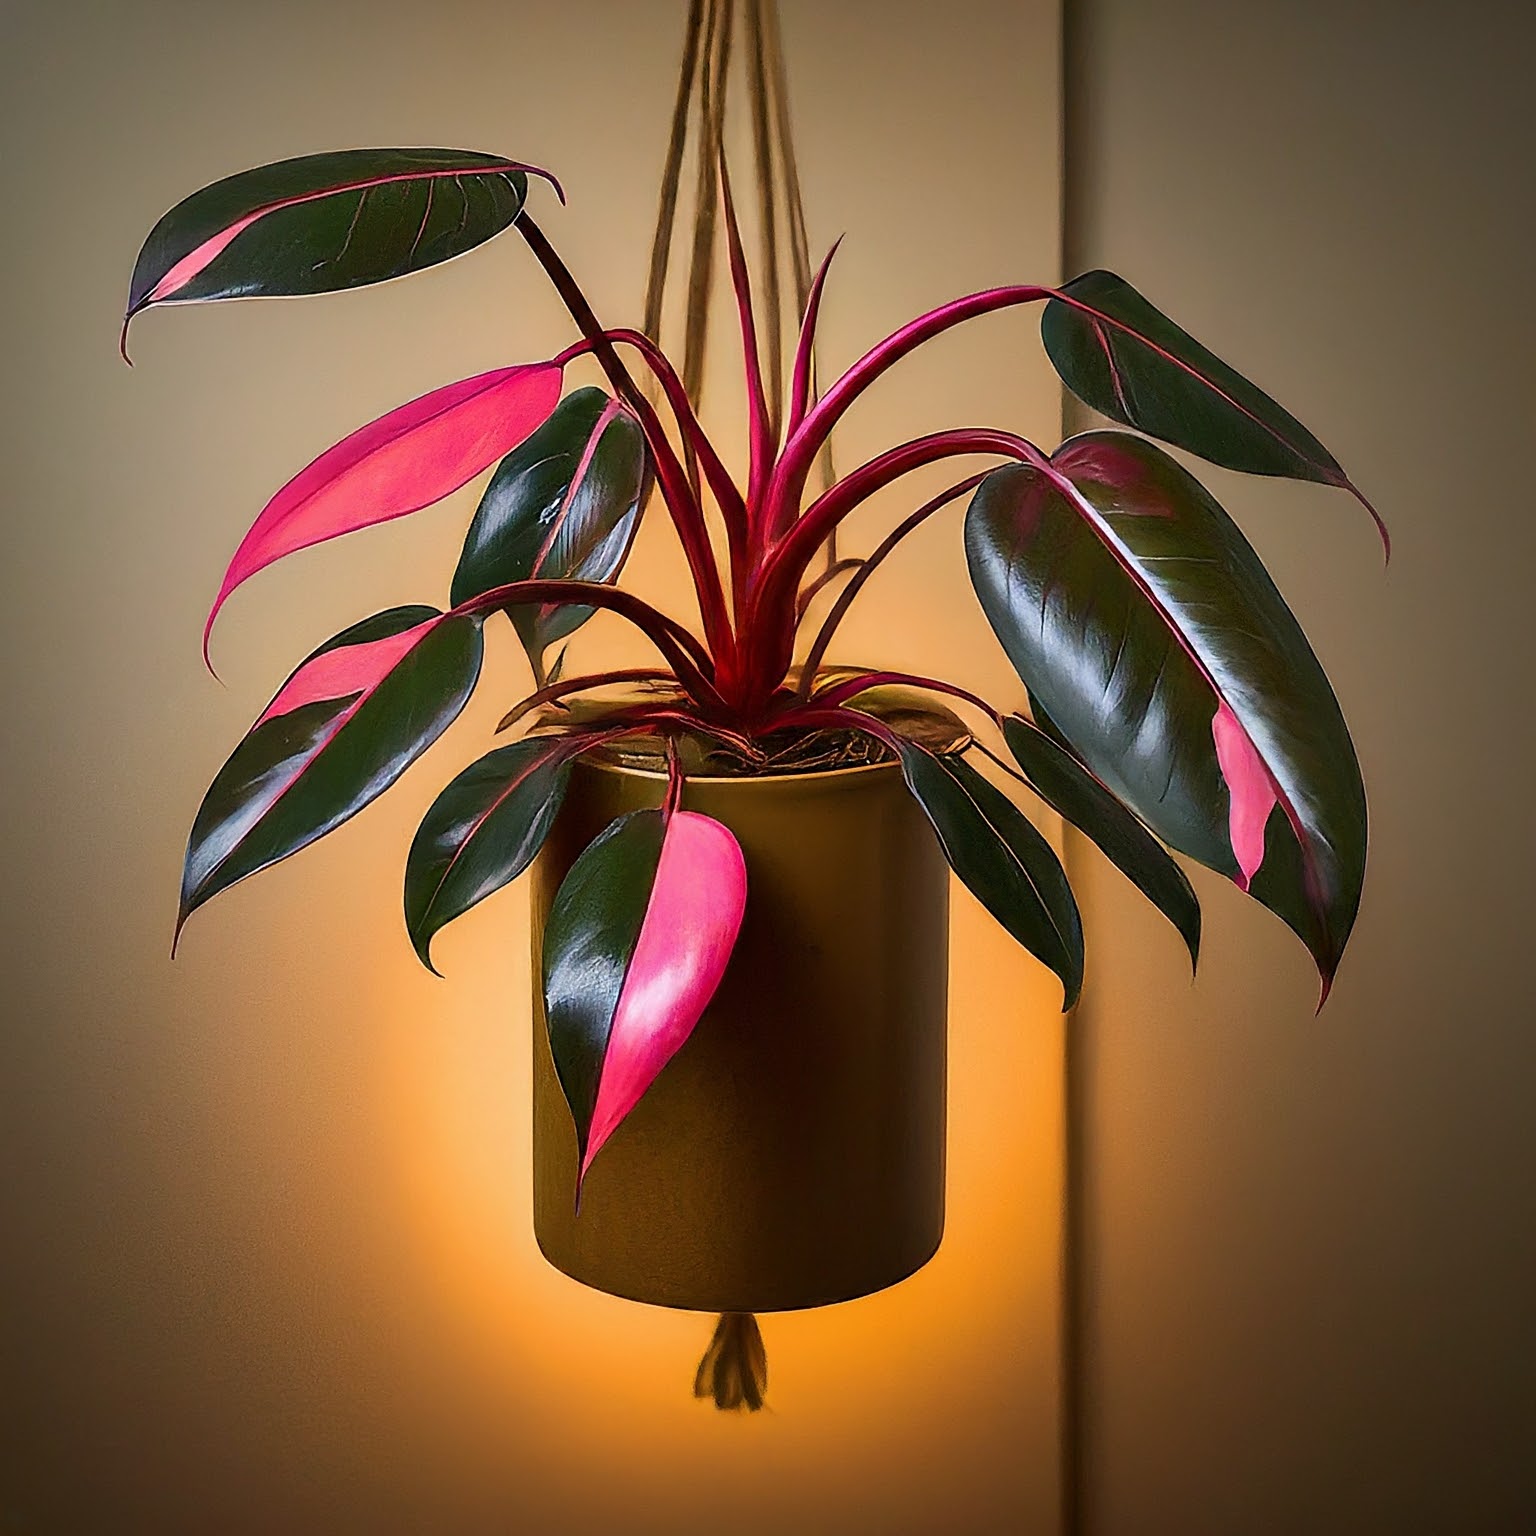 Reasons Why the Pink Princess Philodendron Belongs in Your Home